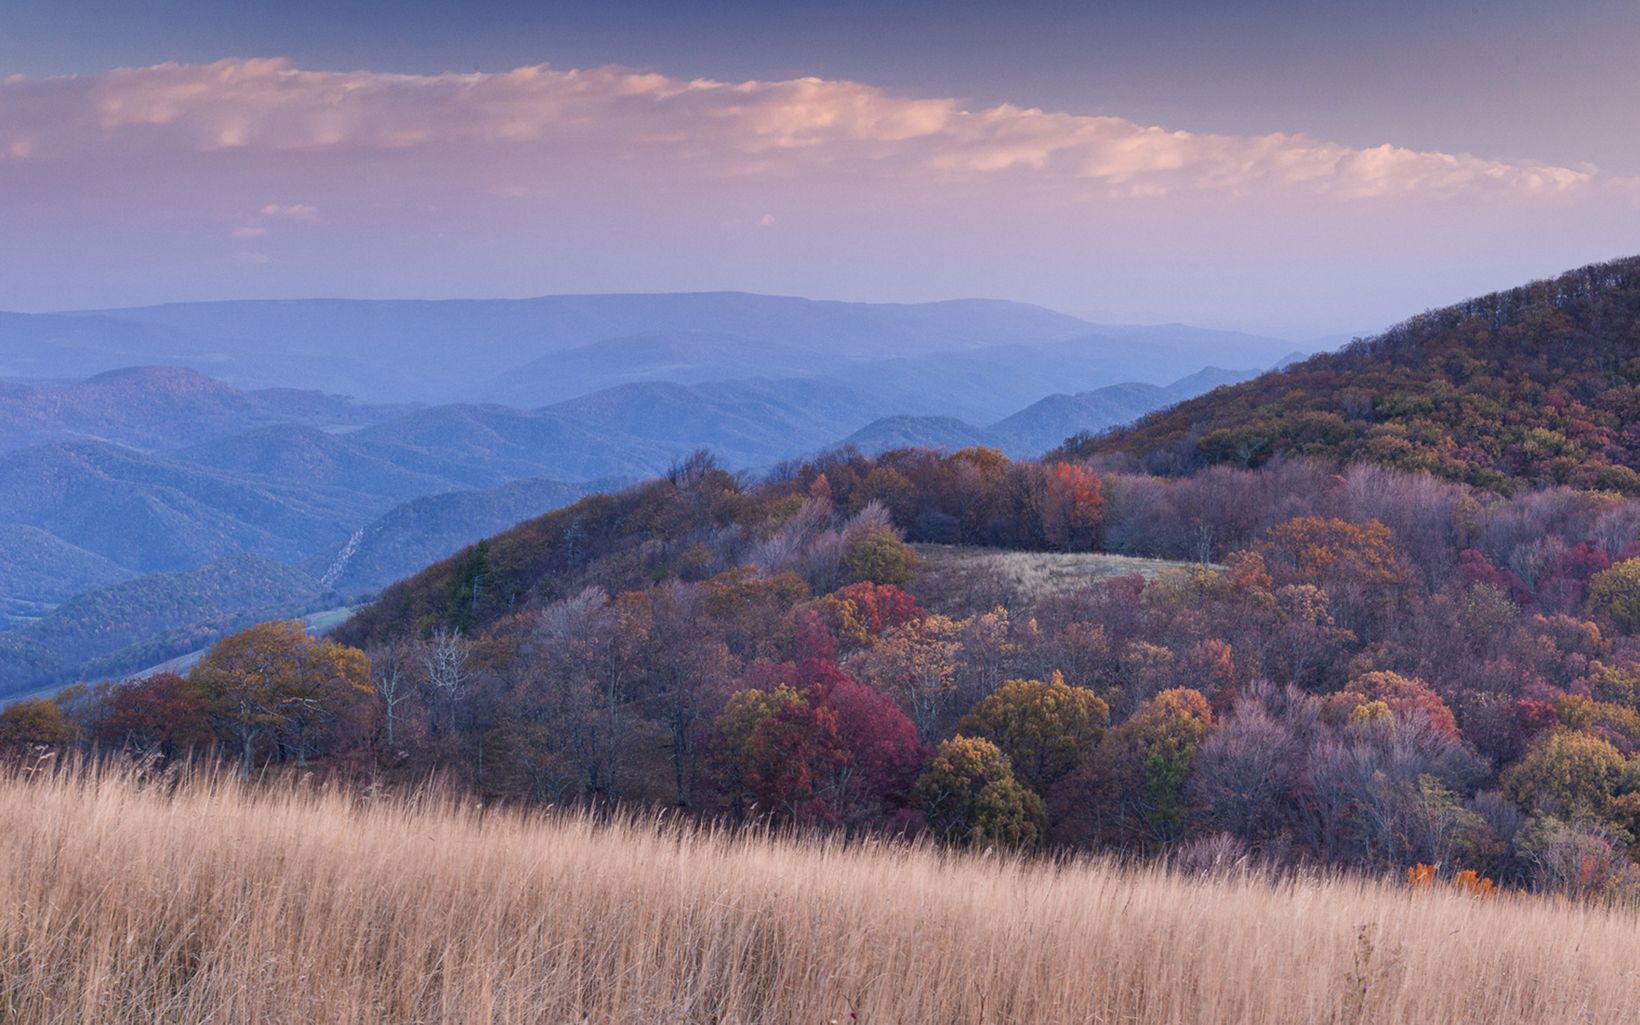 Pike Knob Preserve This preserve in West Virginia's Central Appalachians is located in an area that acts as part of the headwaters of the Chesapeake Bay. © Kent Mason